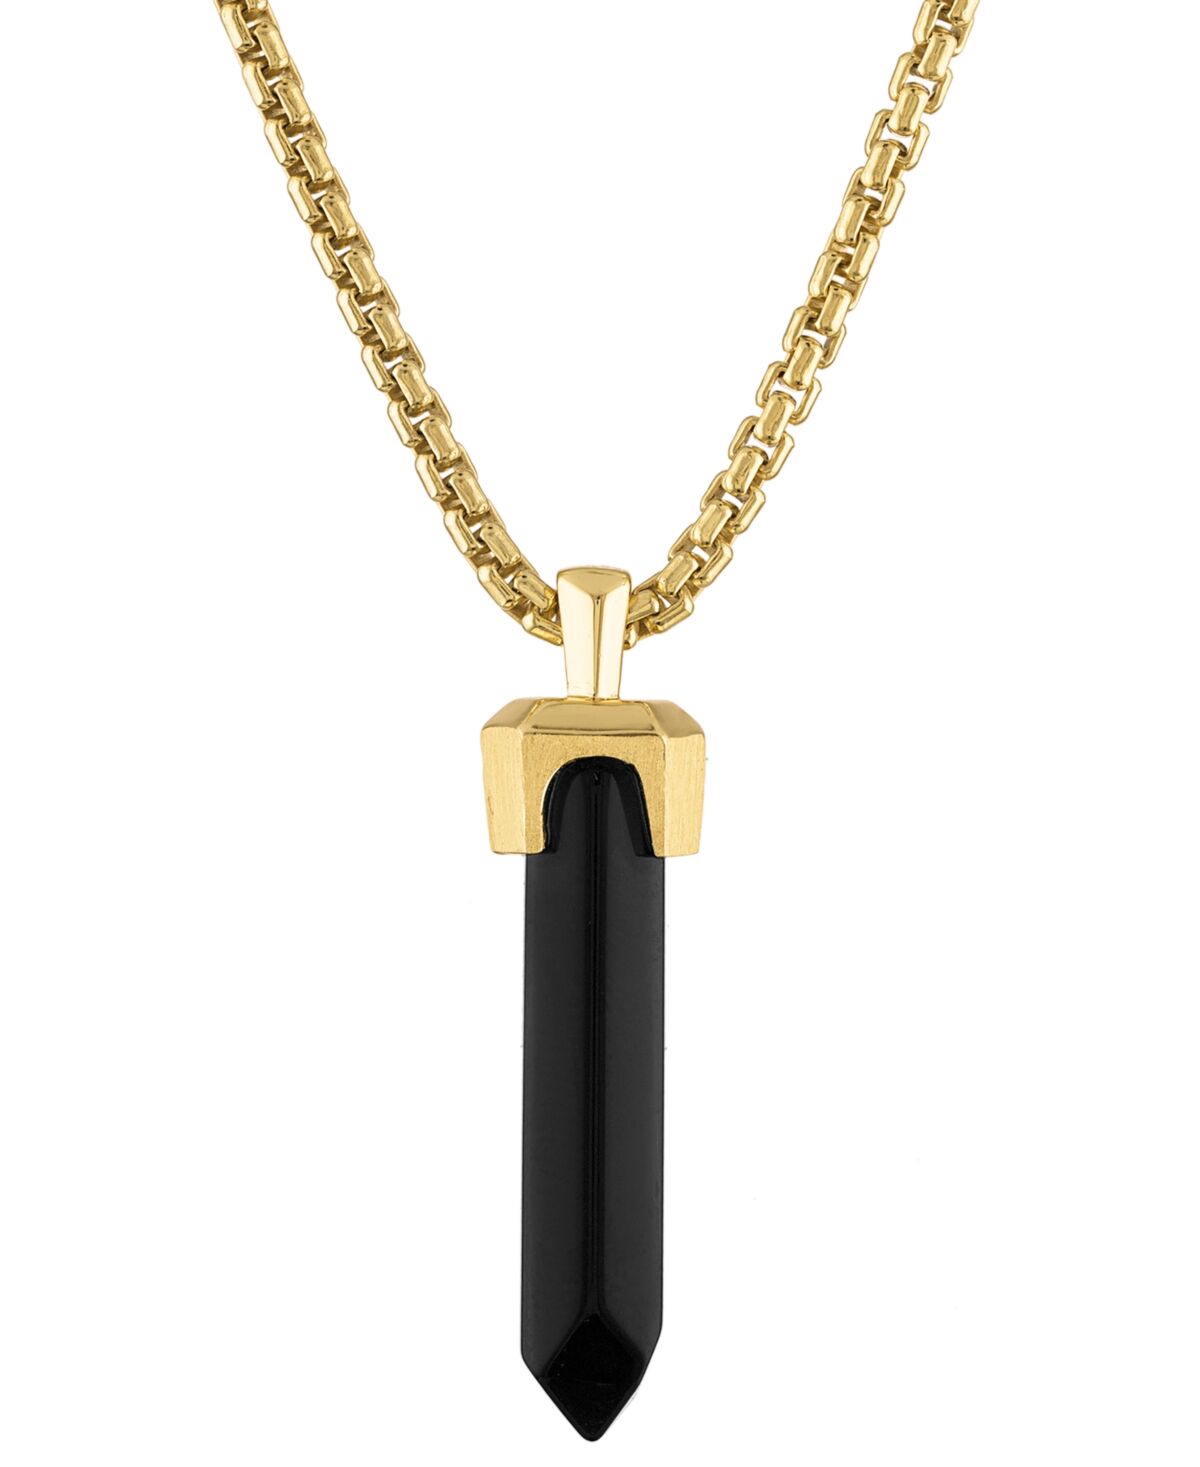 Bulova Men's Icon Black Onyx Pendant Necklace in 14k Gold-Plated Sterling Silver, 24